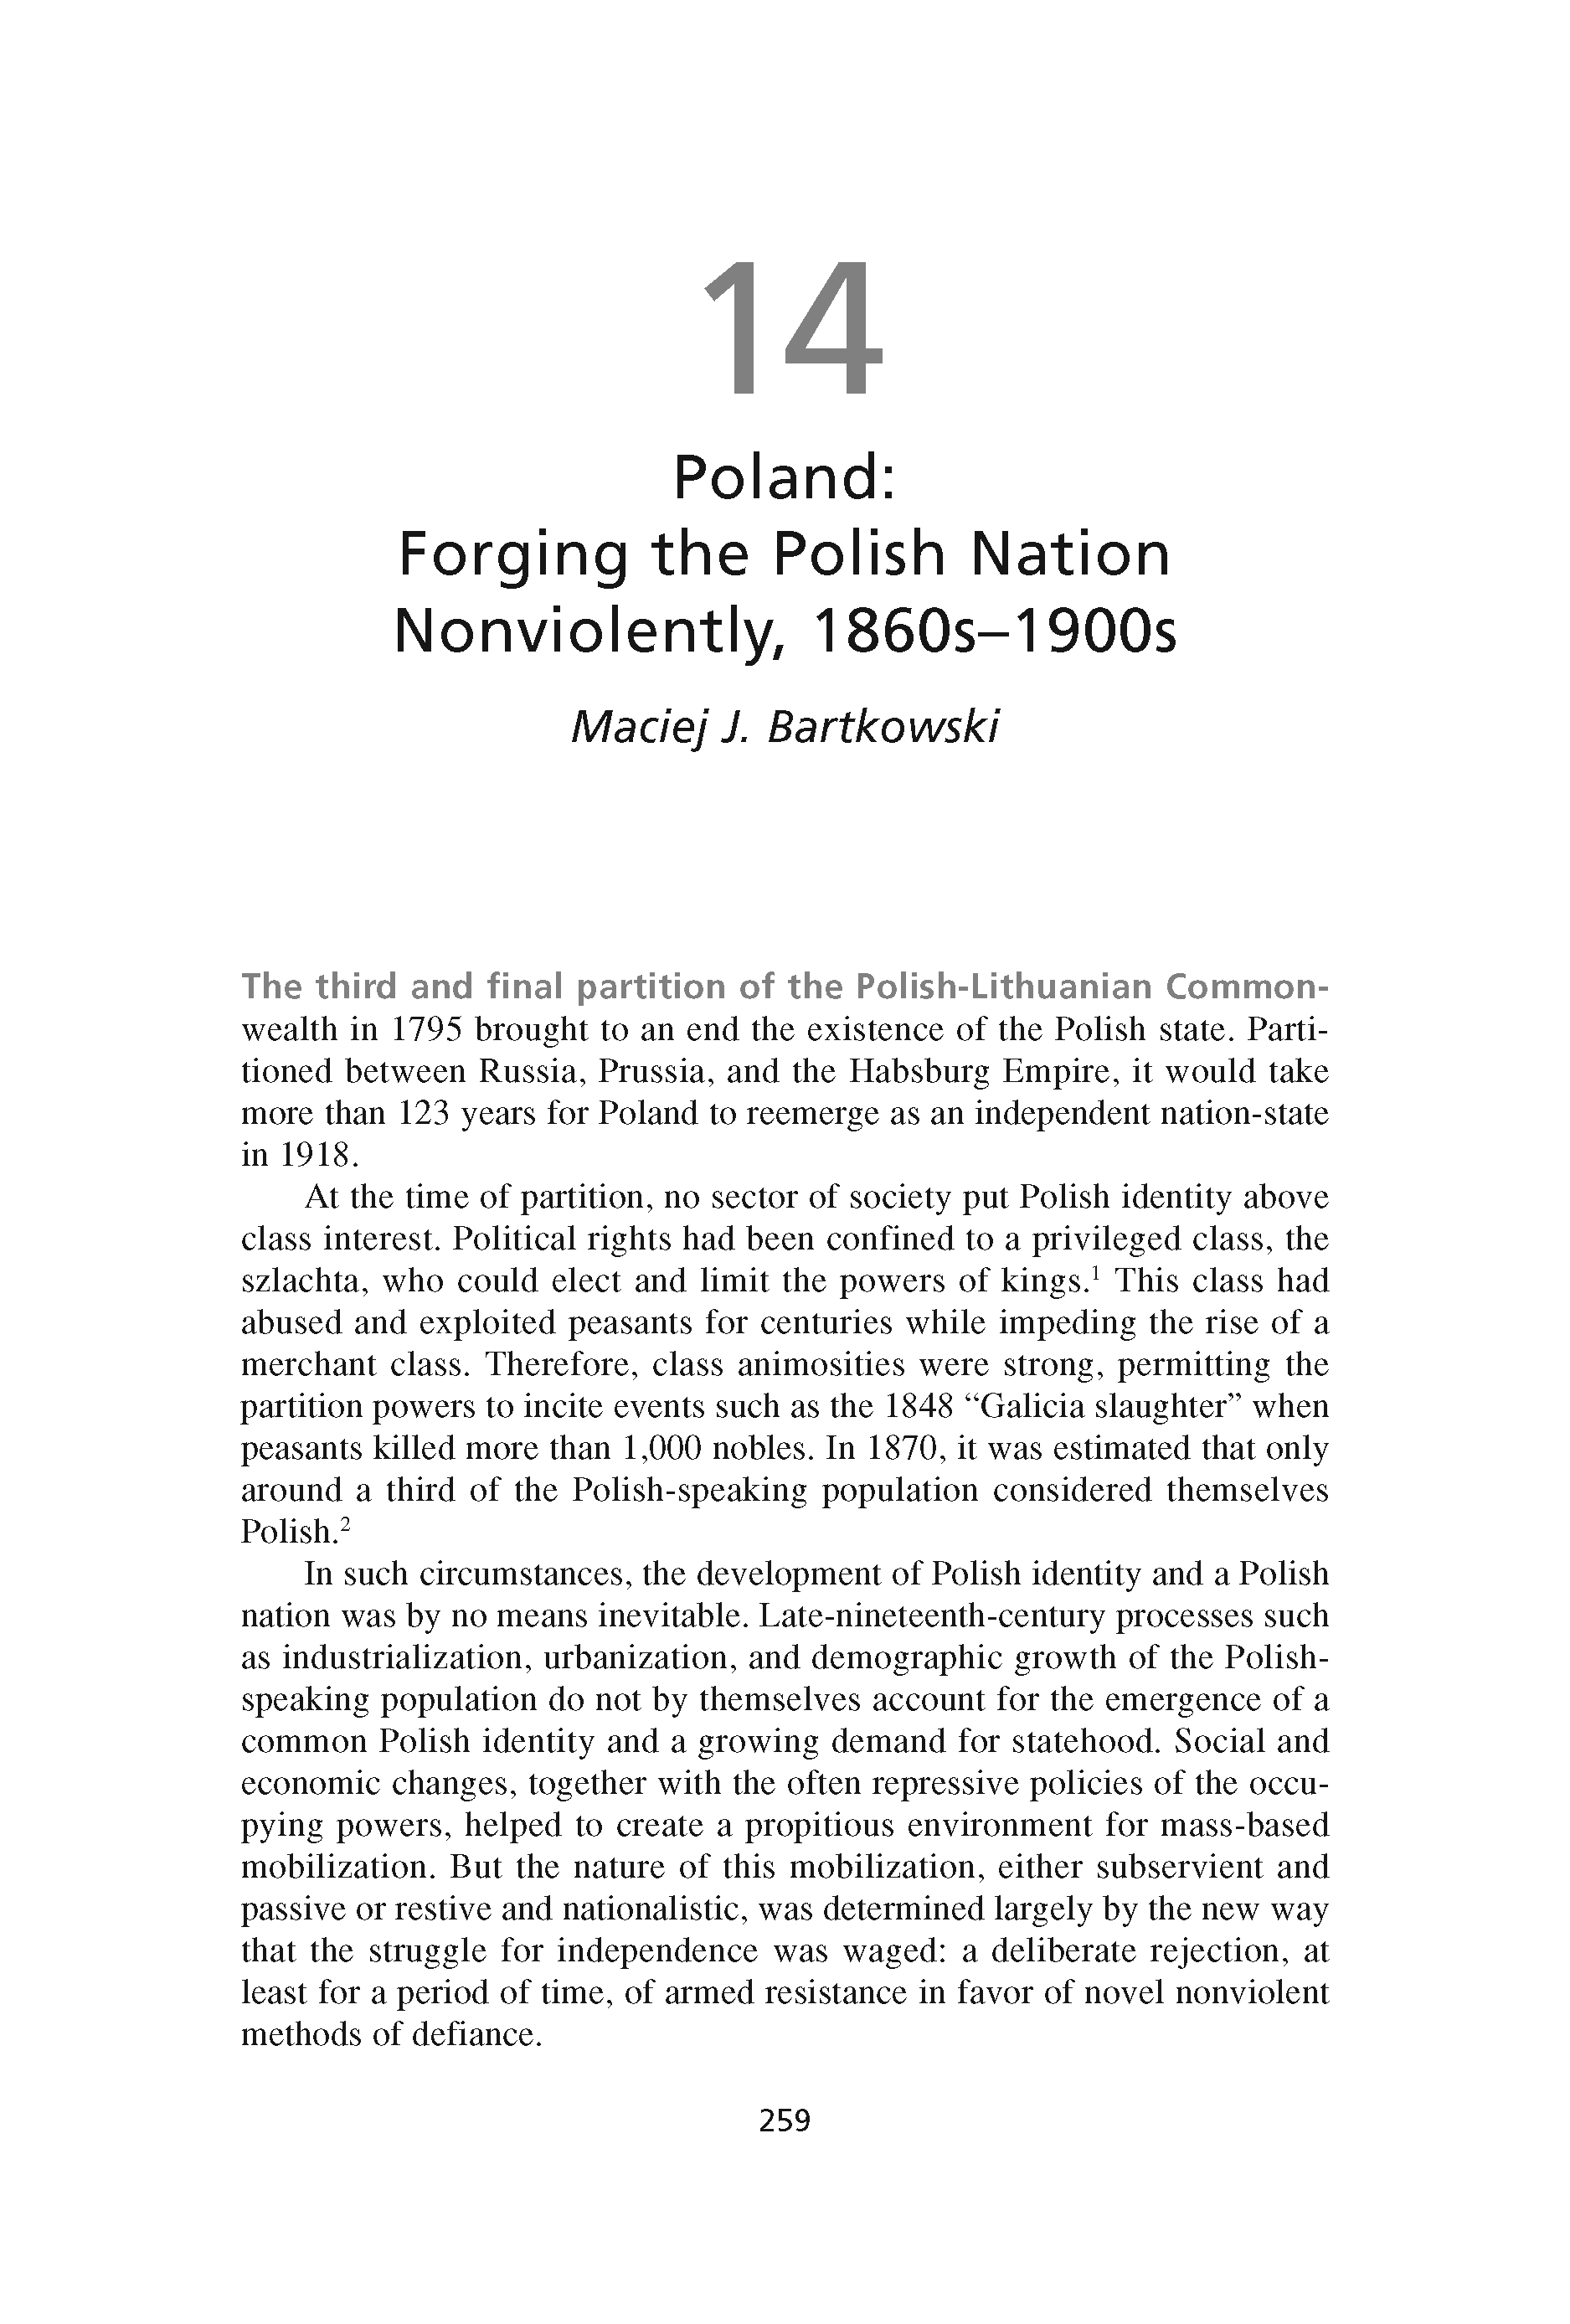 Poland: Forging the Polish Nation Nonviolently, 1860s-1900s (Chapter 14 from ‘Recovering Nonviolent History’)